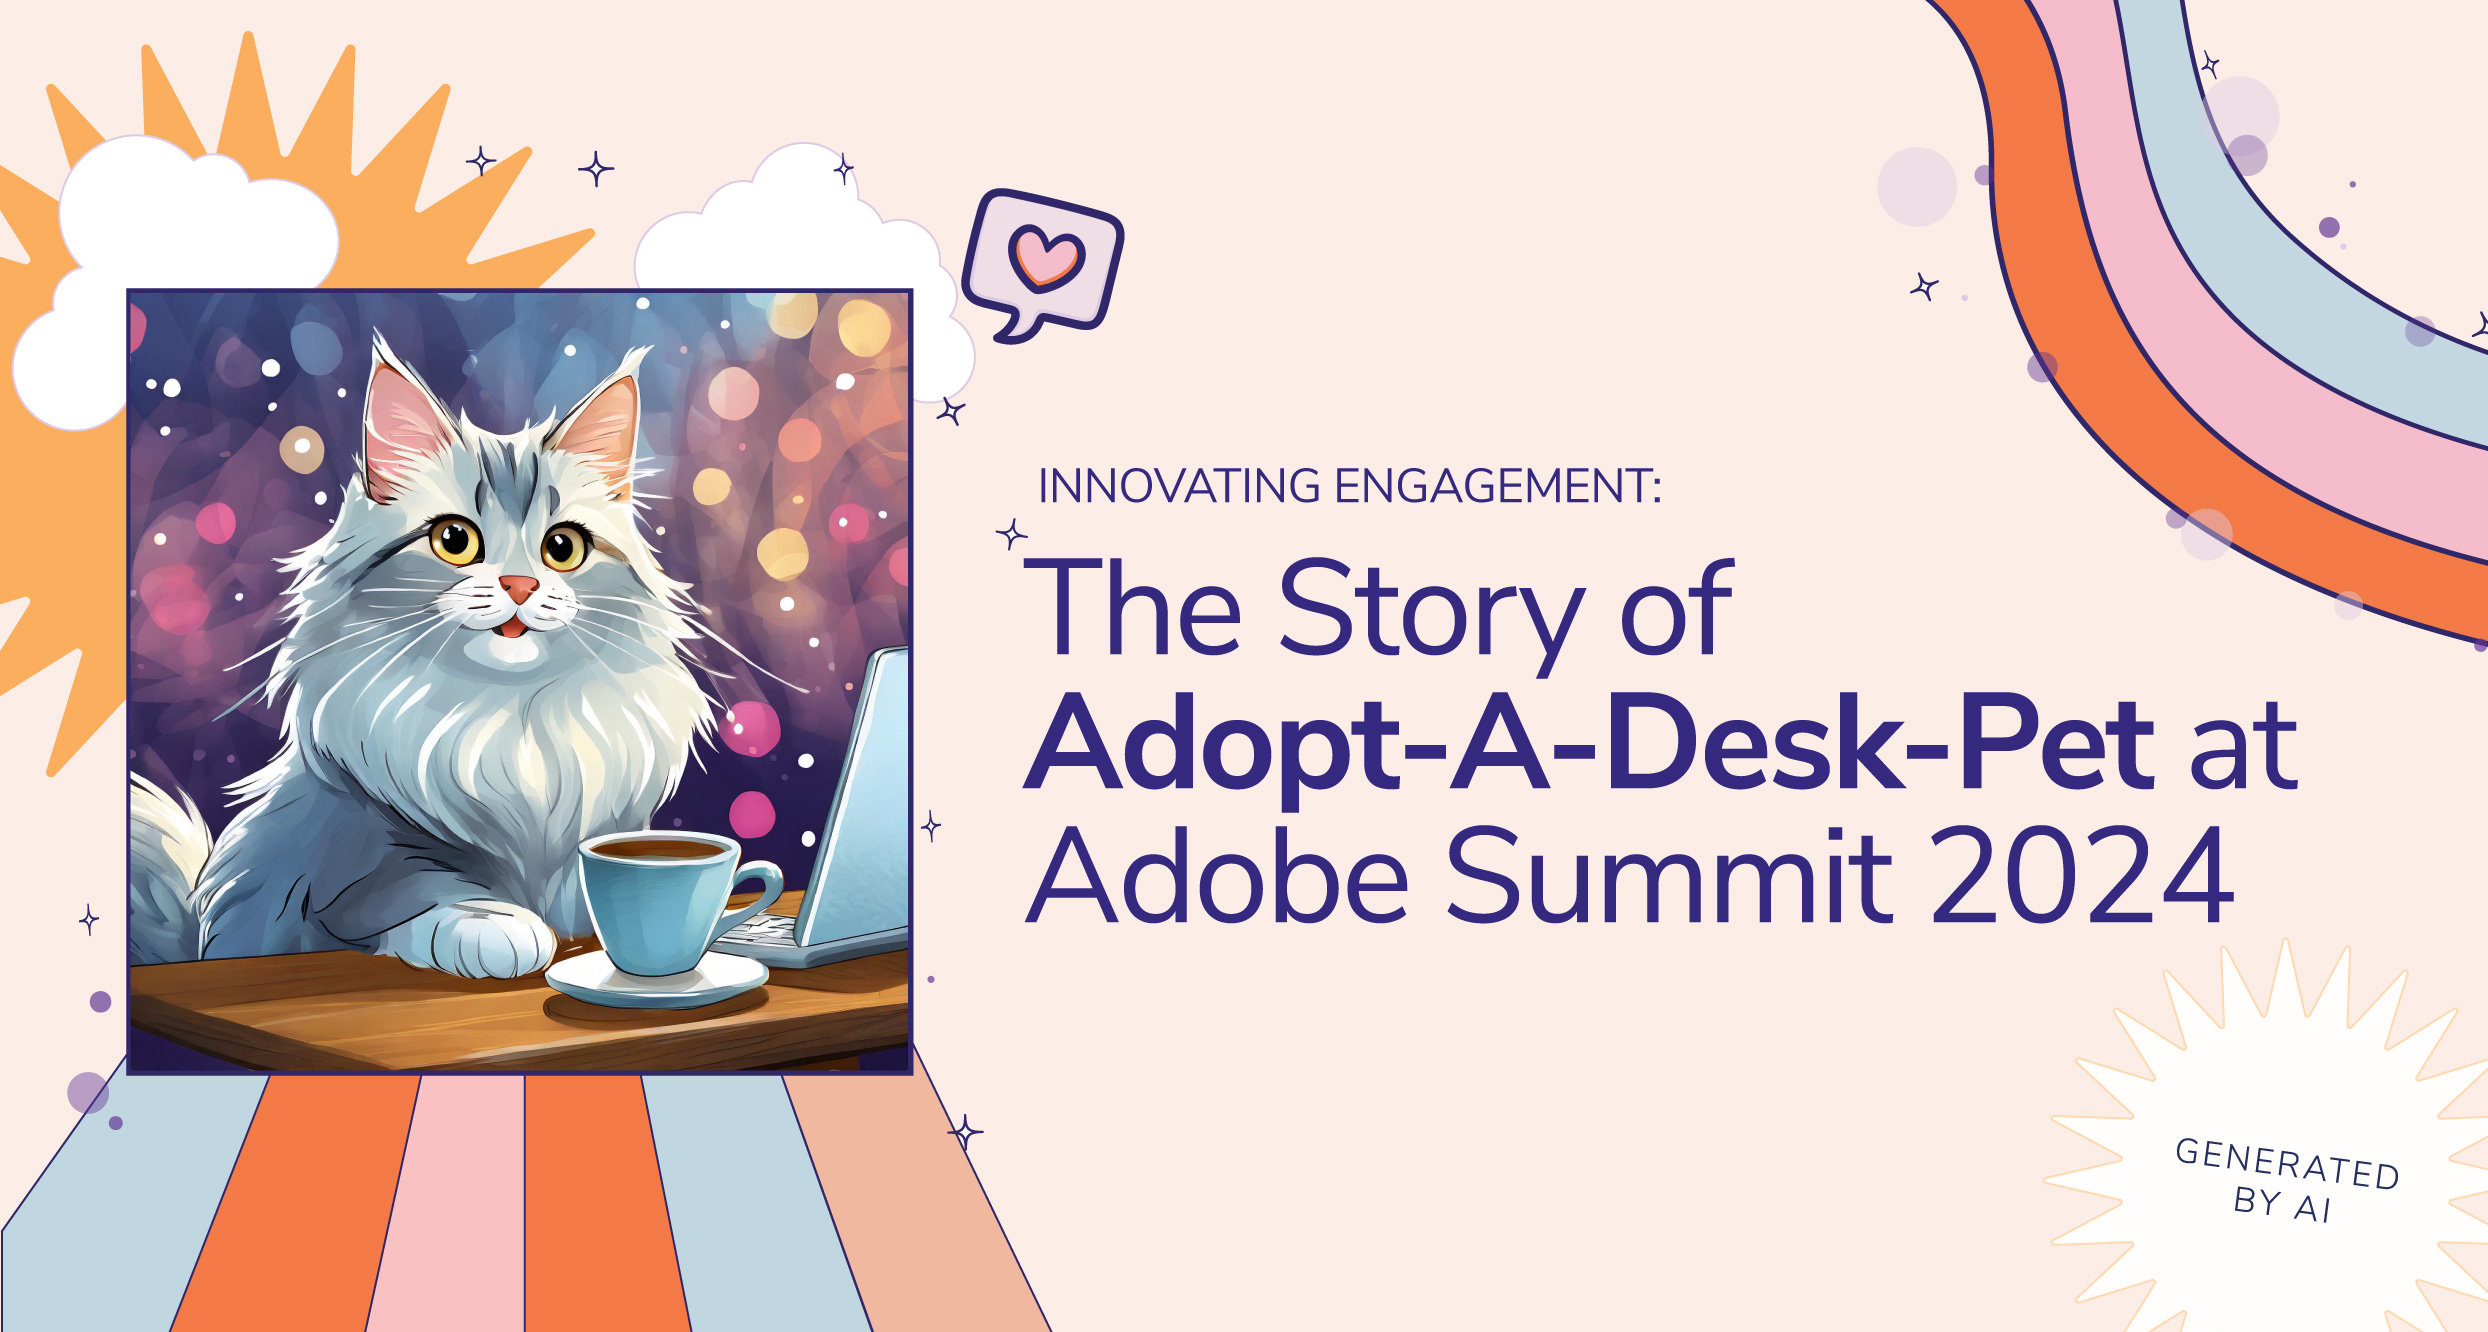 Innovating Engagement: The Story of Adopt-a-Desk-Pet at Adobe Summit 2024